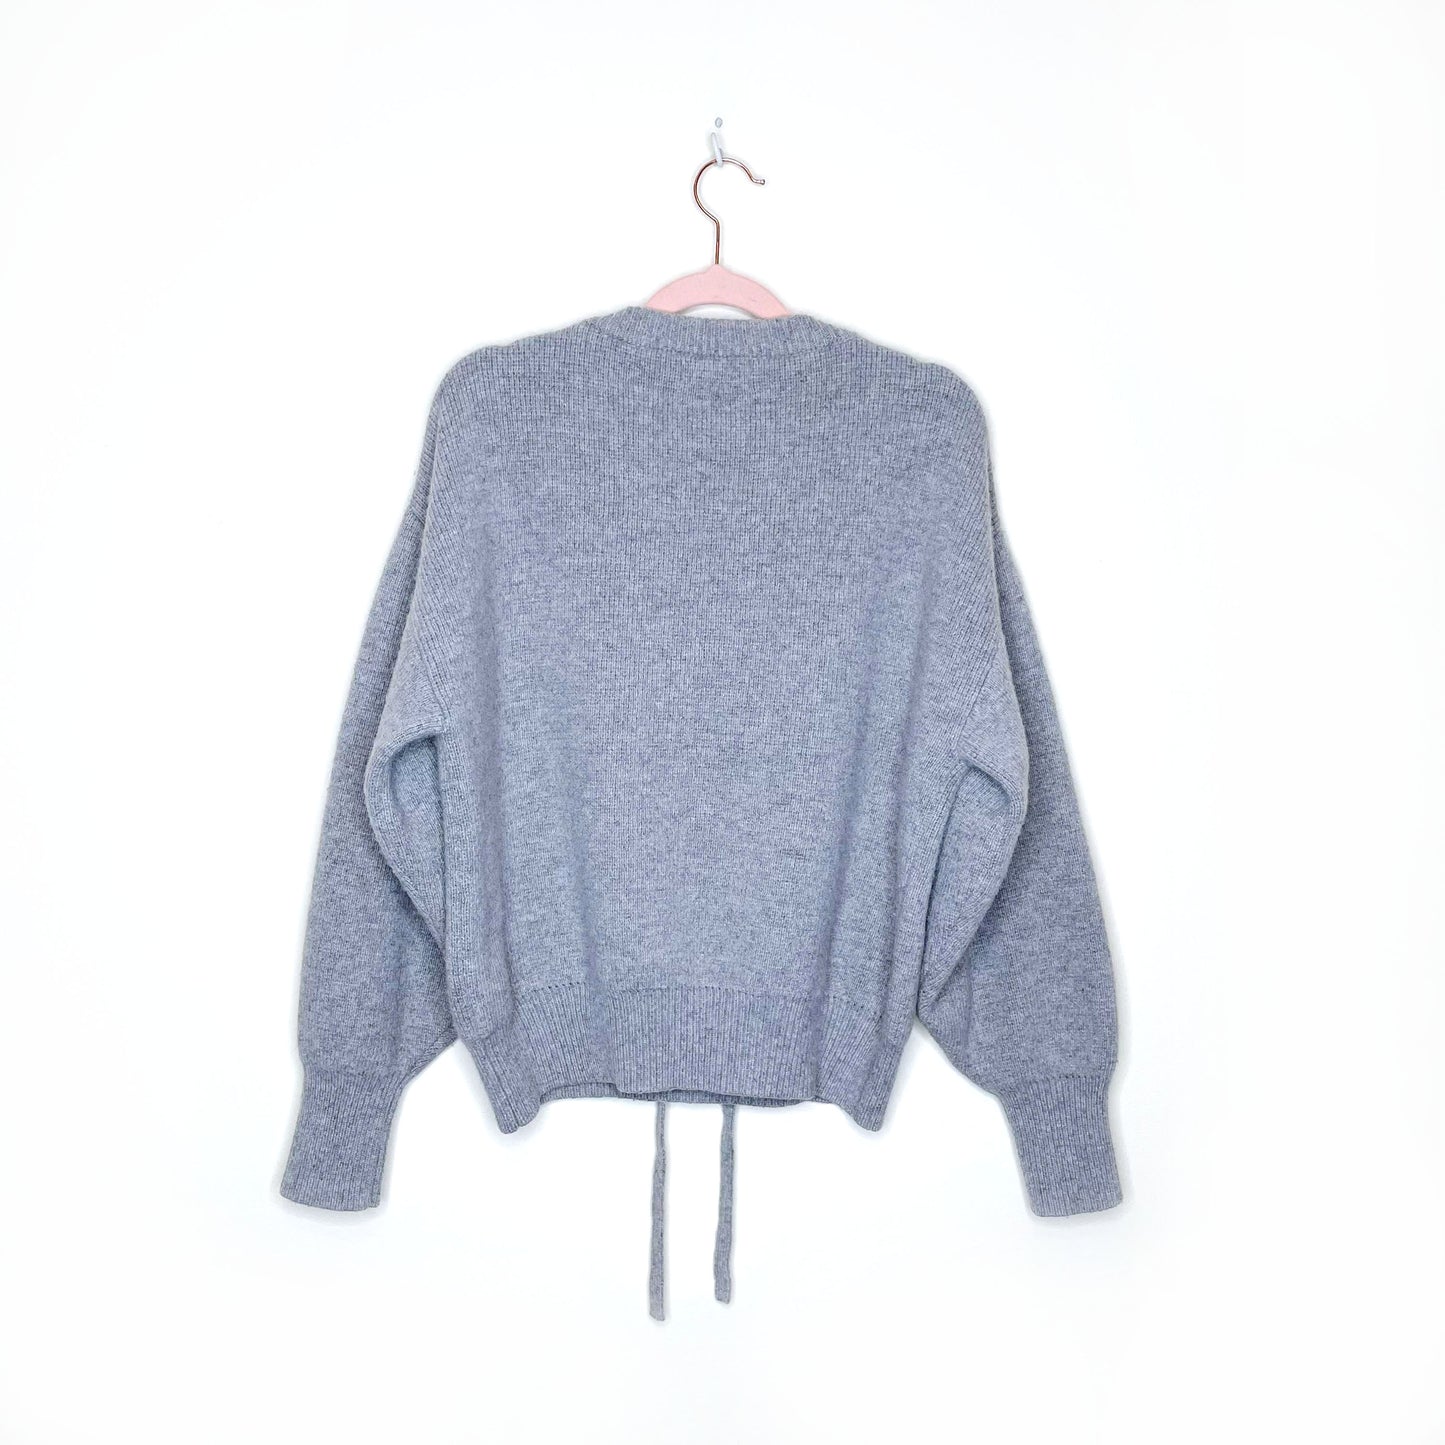 isabel marant étoile grey wool-blend sweater - size small